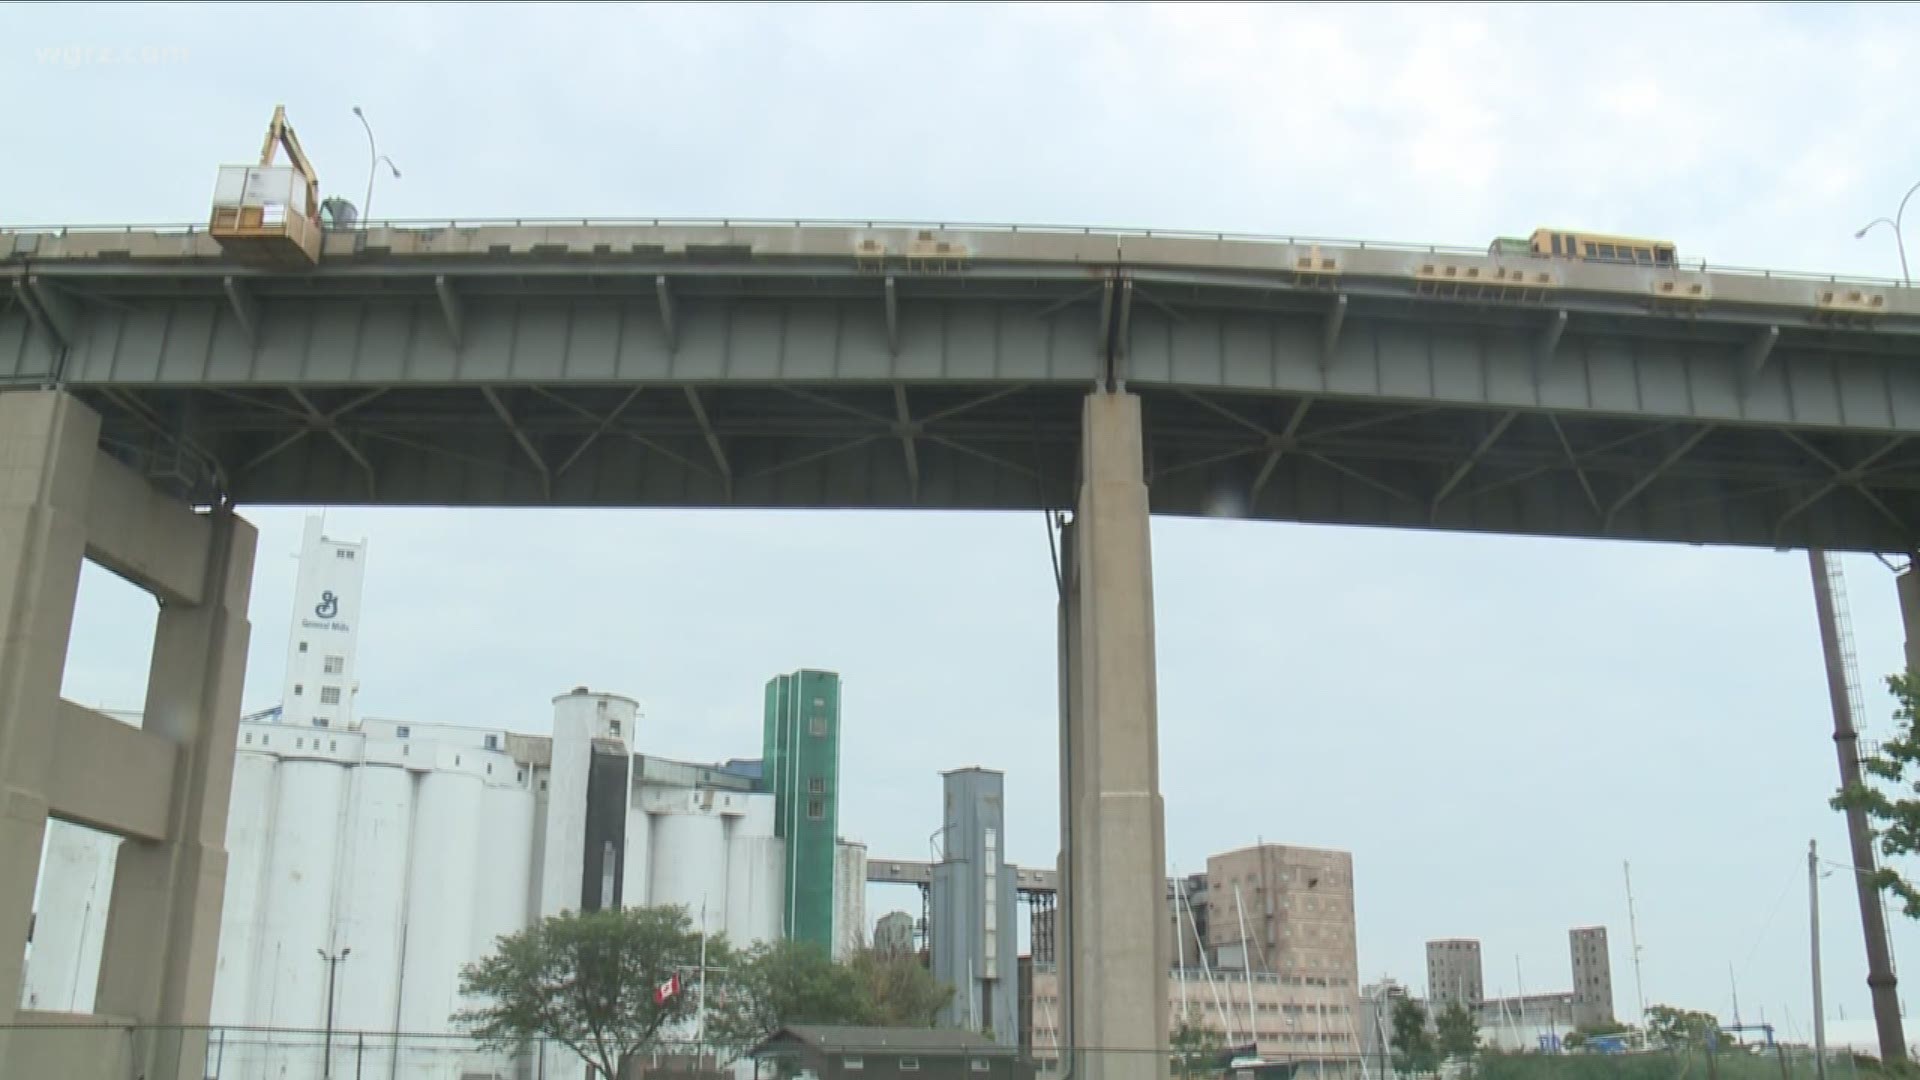 Should the skyway stay or go?